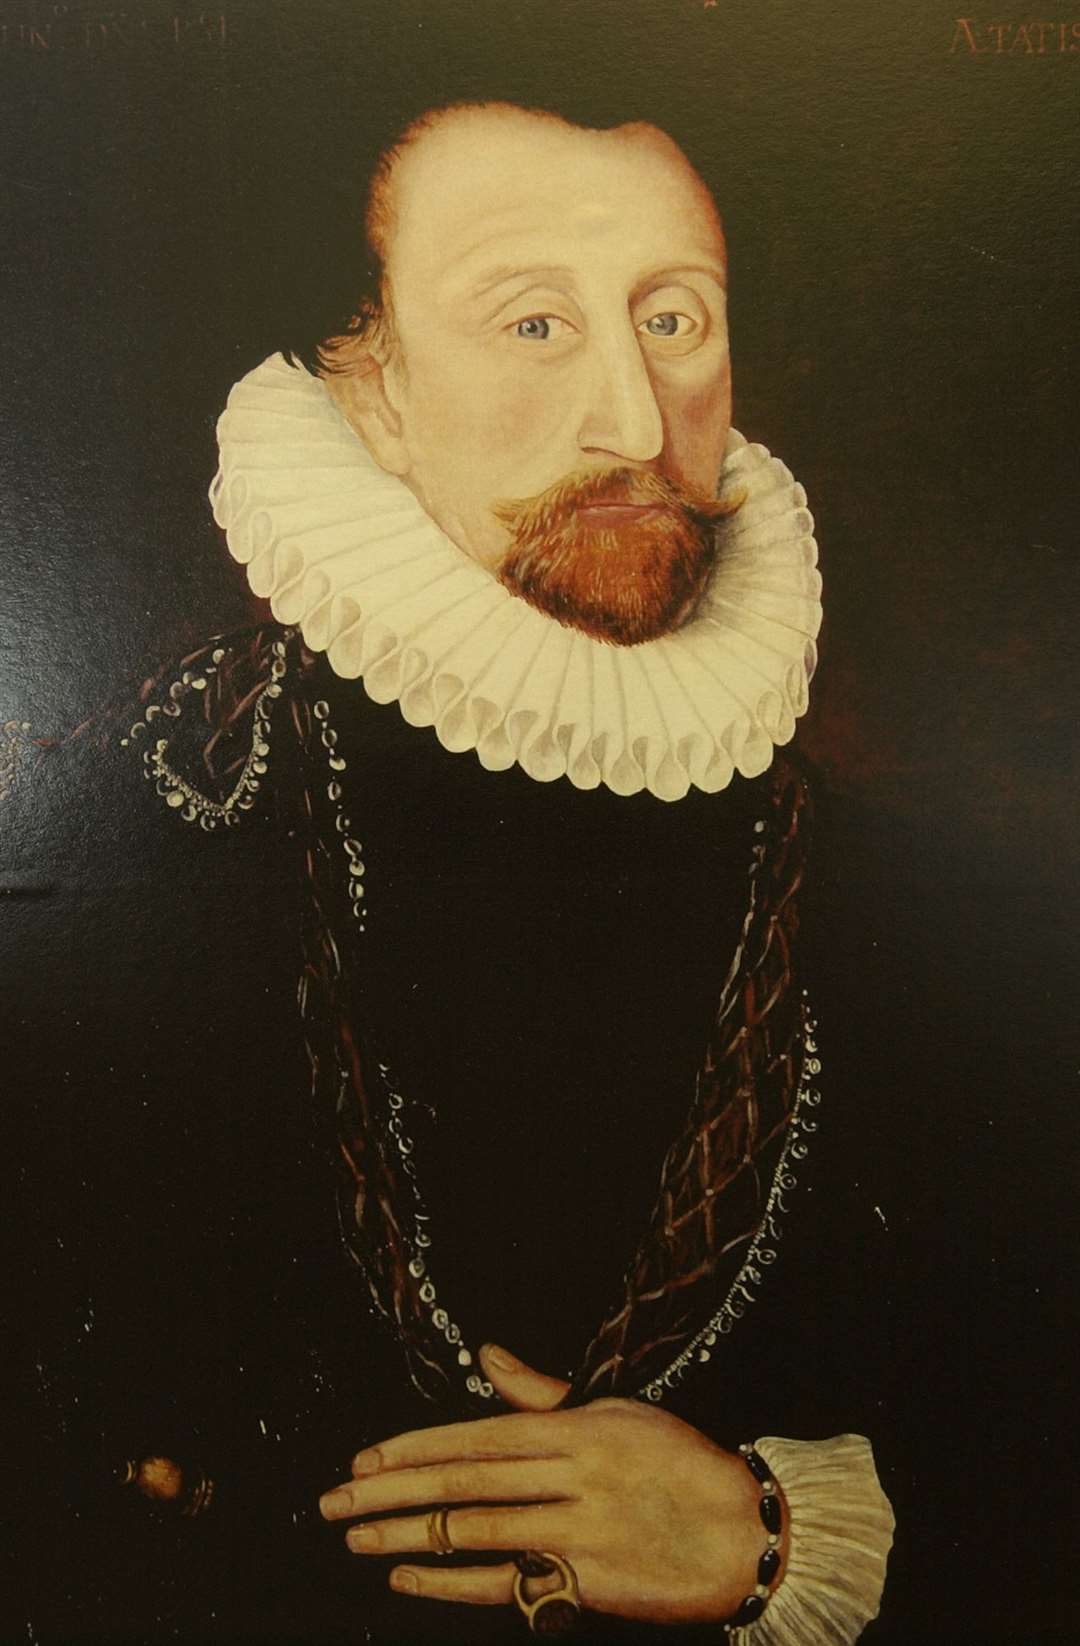 Sir John Hawkins was a naval commander in Chatham during the Elizabethan period and one of Britain's first slave traders